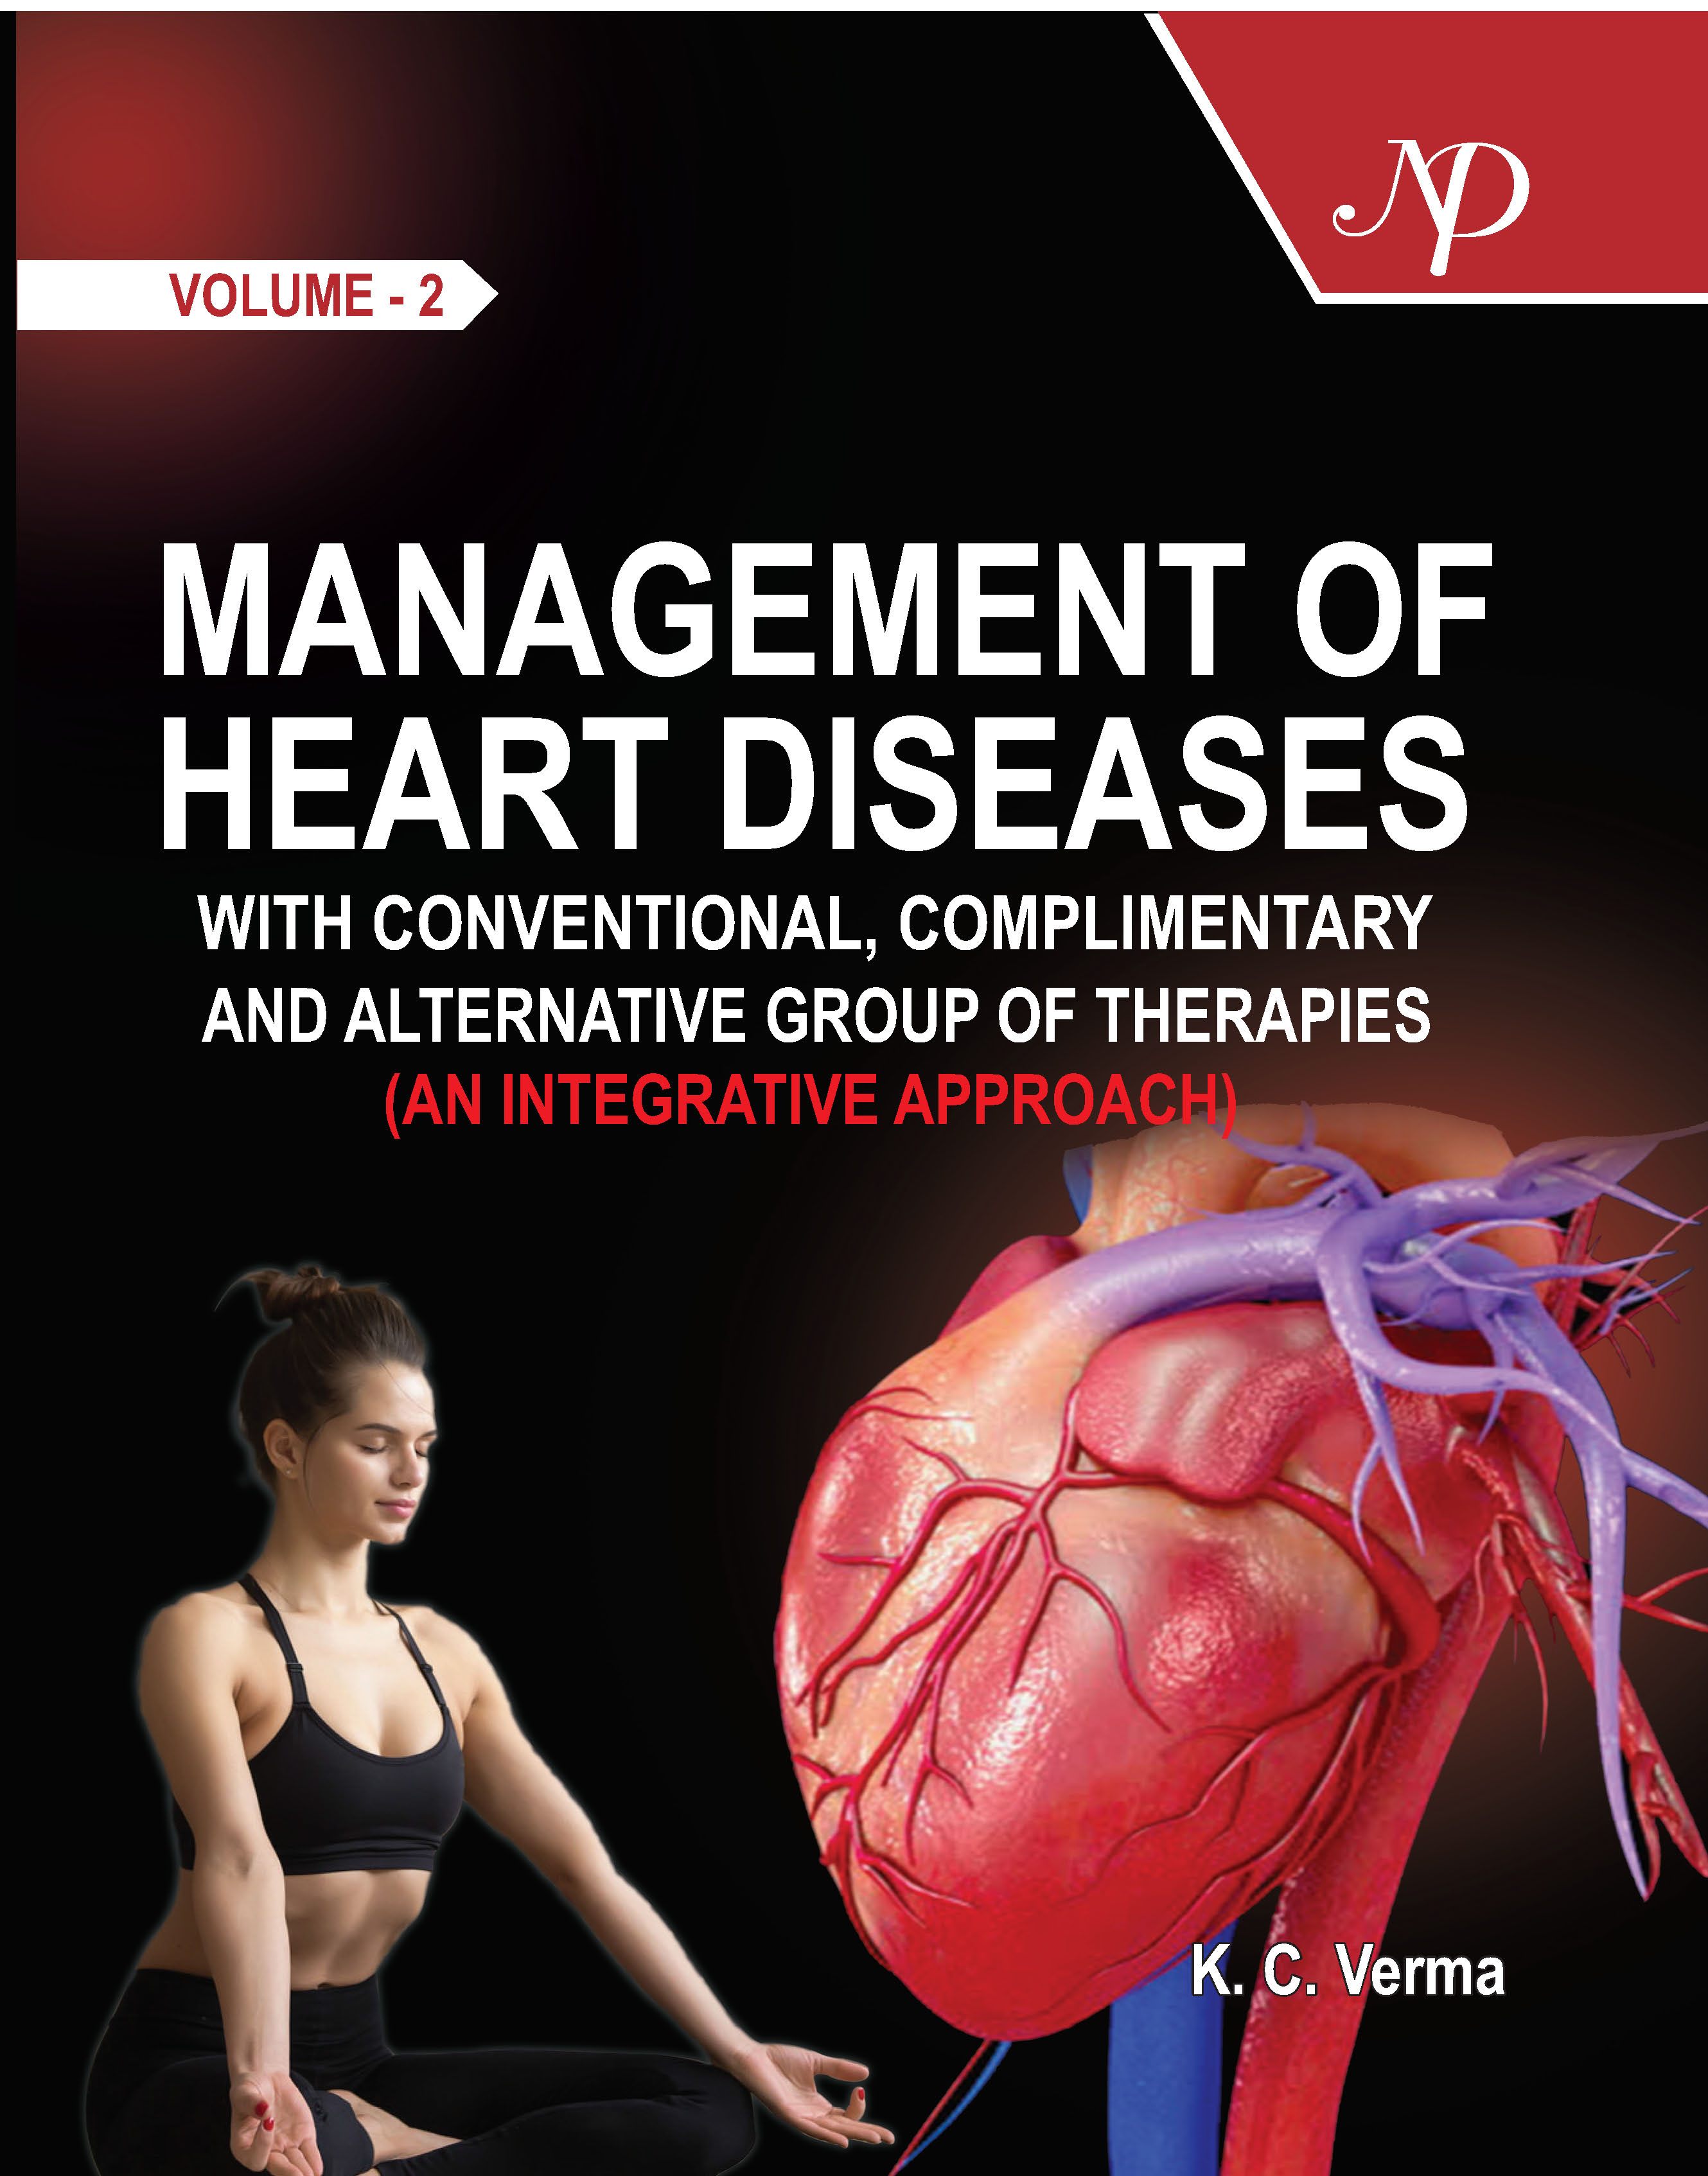 2 Cover Management of Heart Diseases with Conventional, Complimentary and Alternative Group of Therapies.jpg